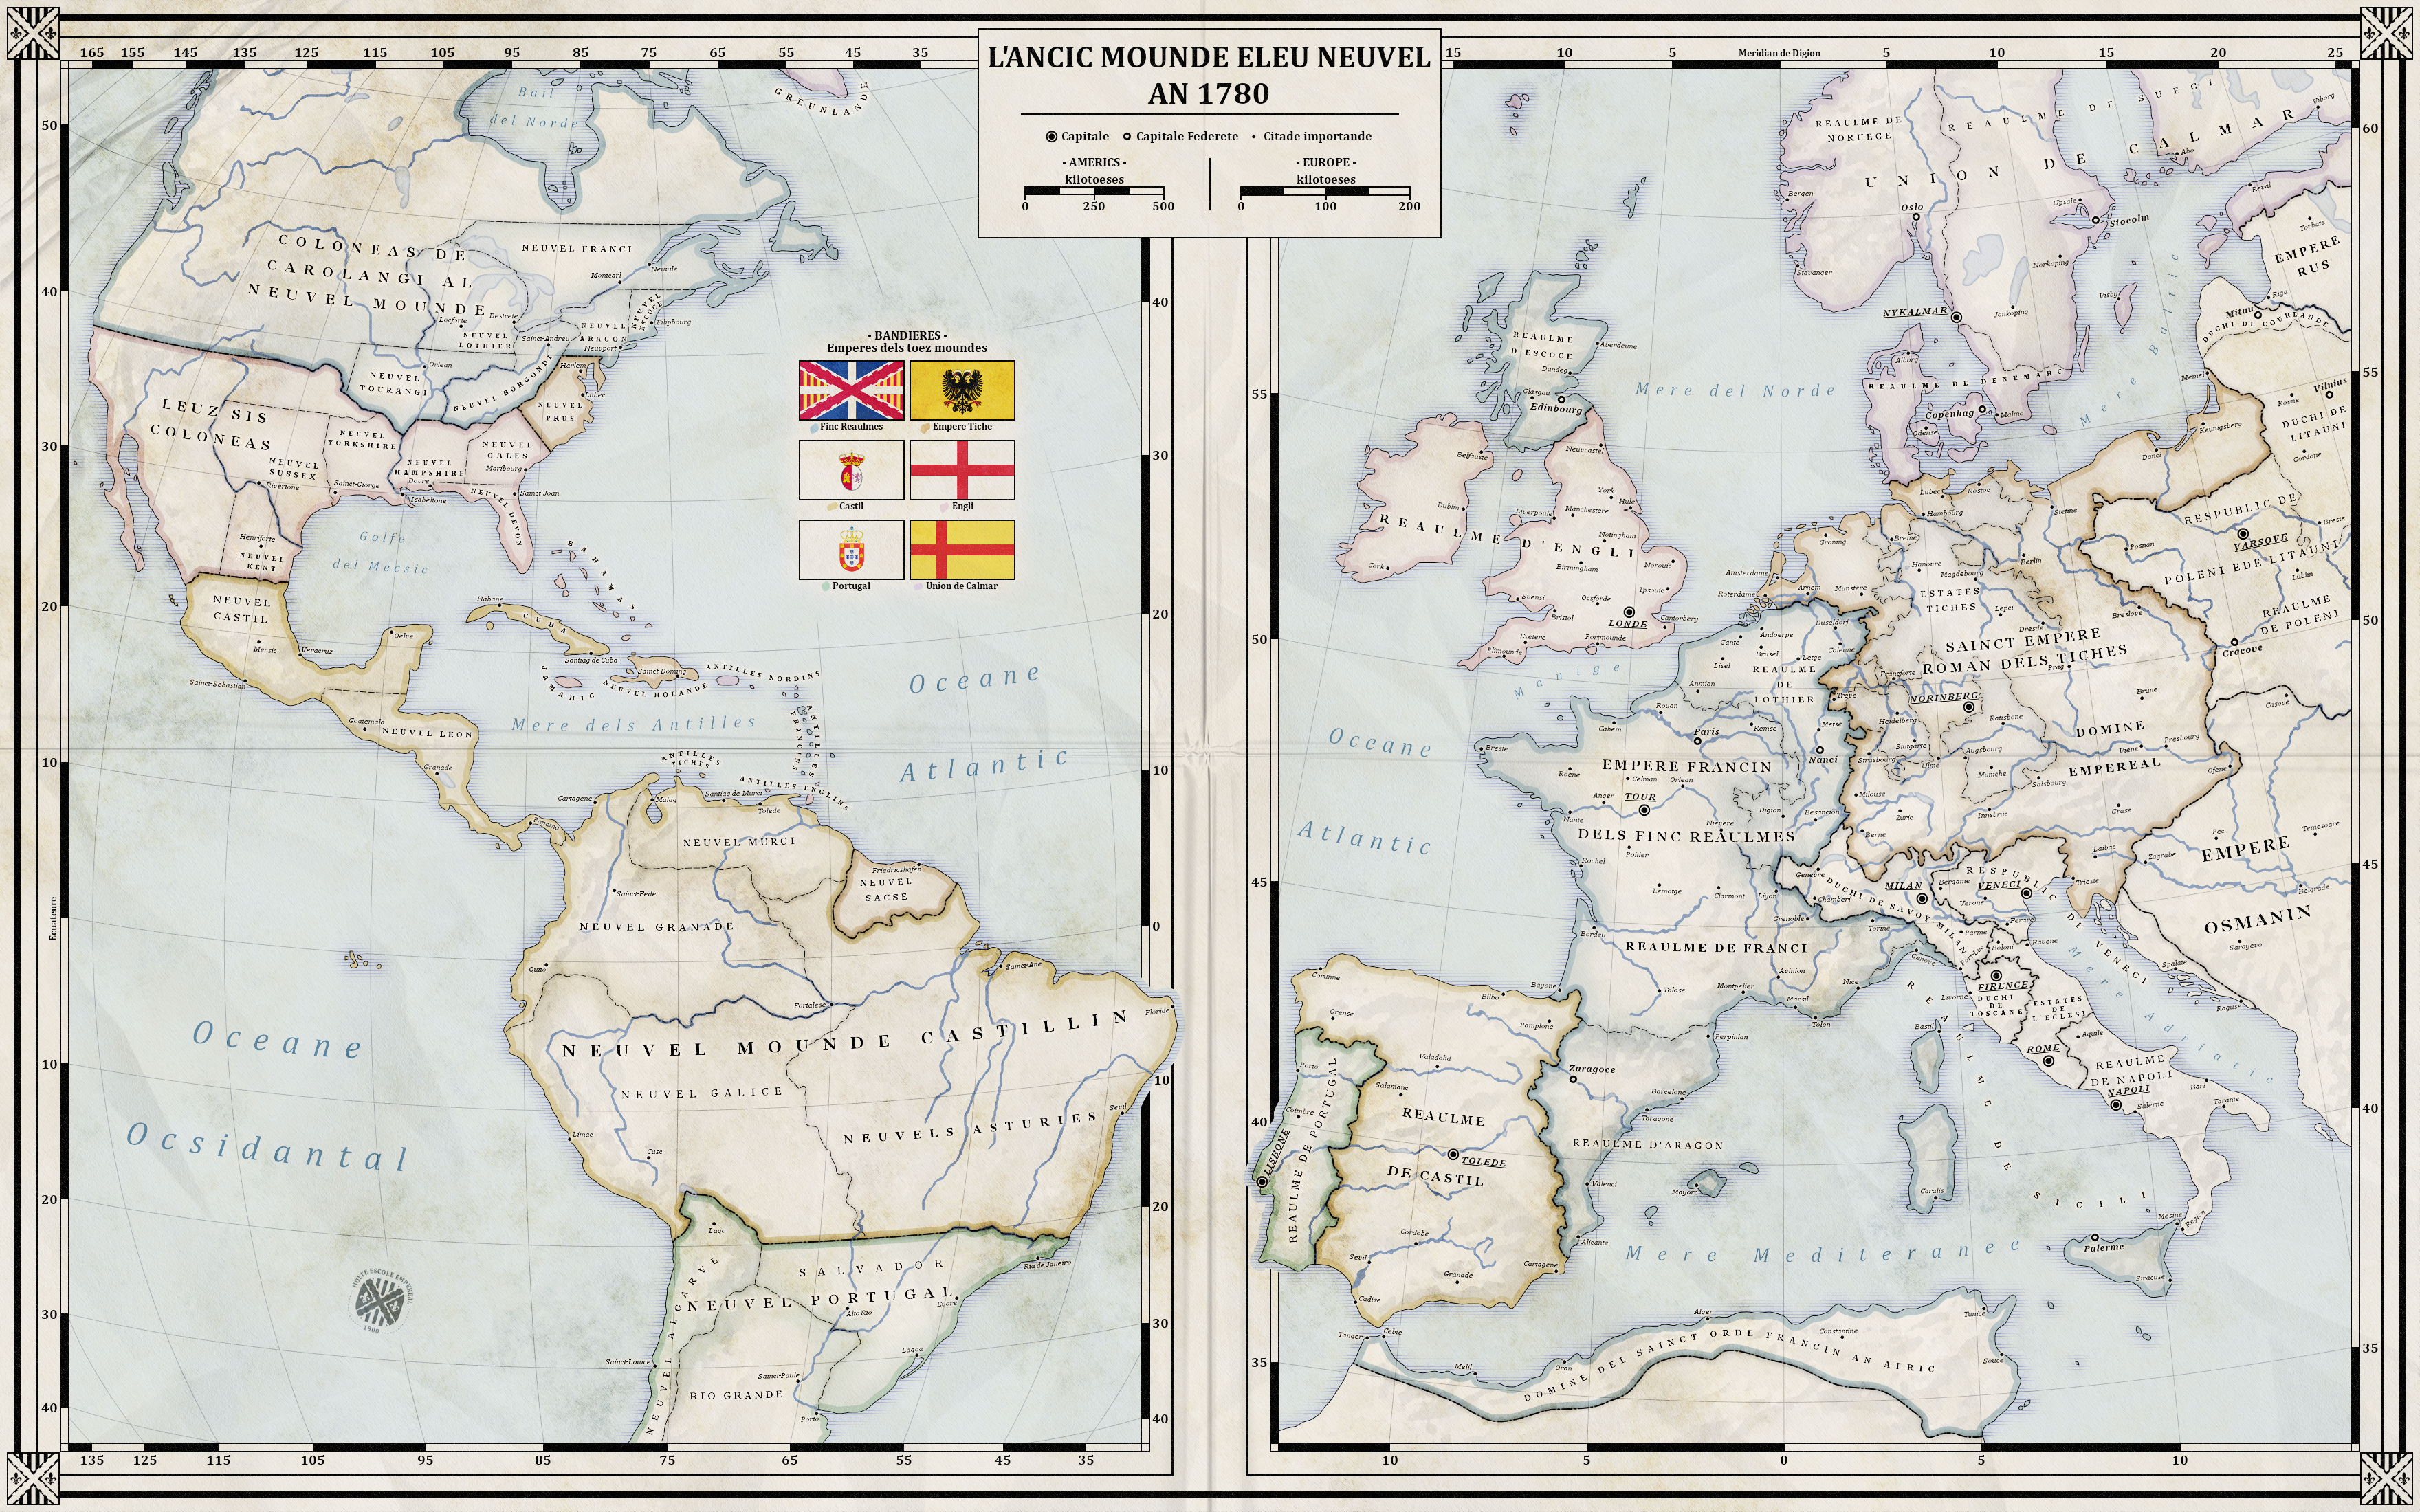 Empires of the both worlds - 1780 (Alt. History) by ZalringDA